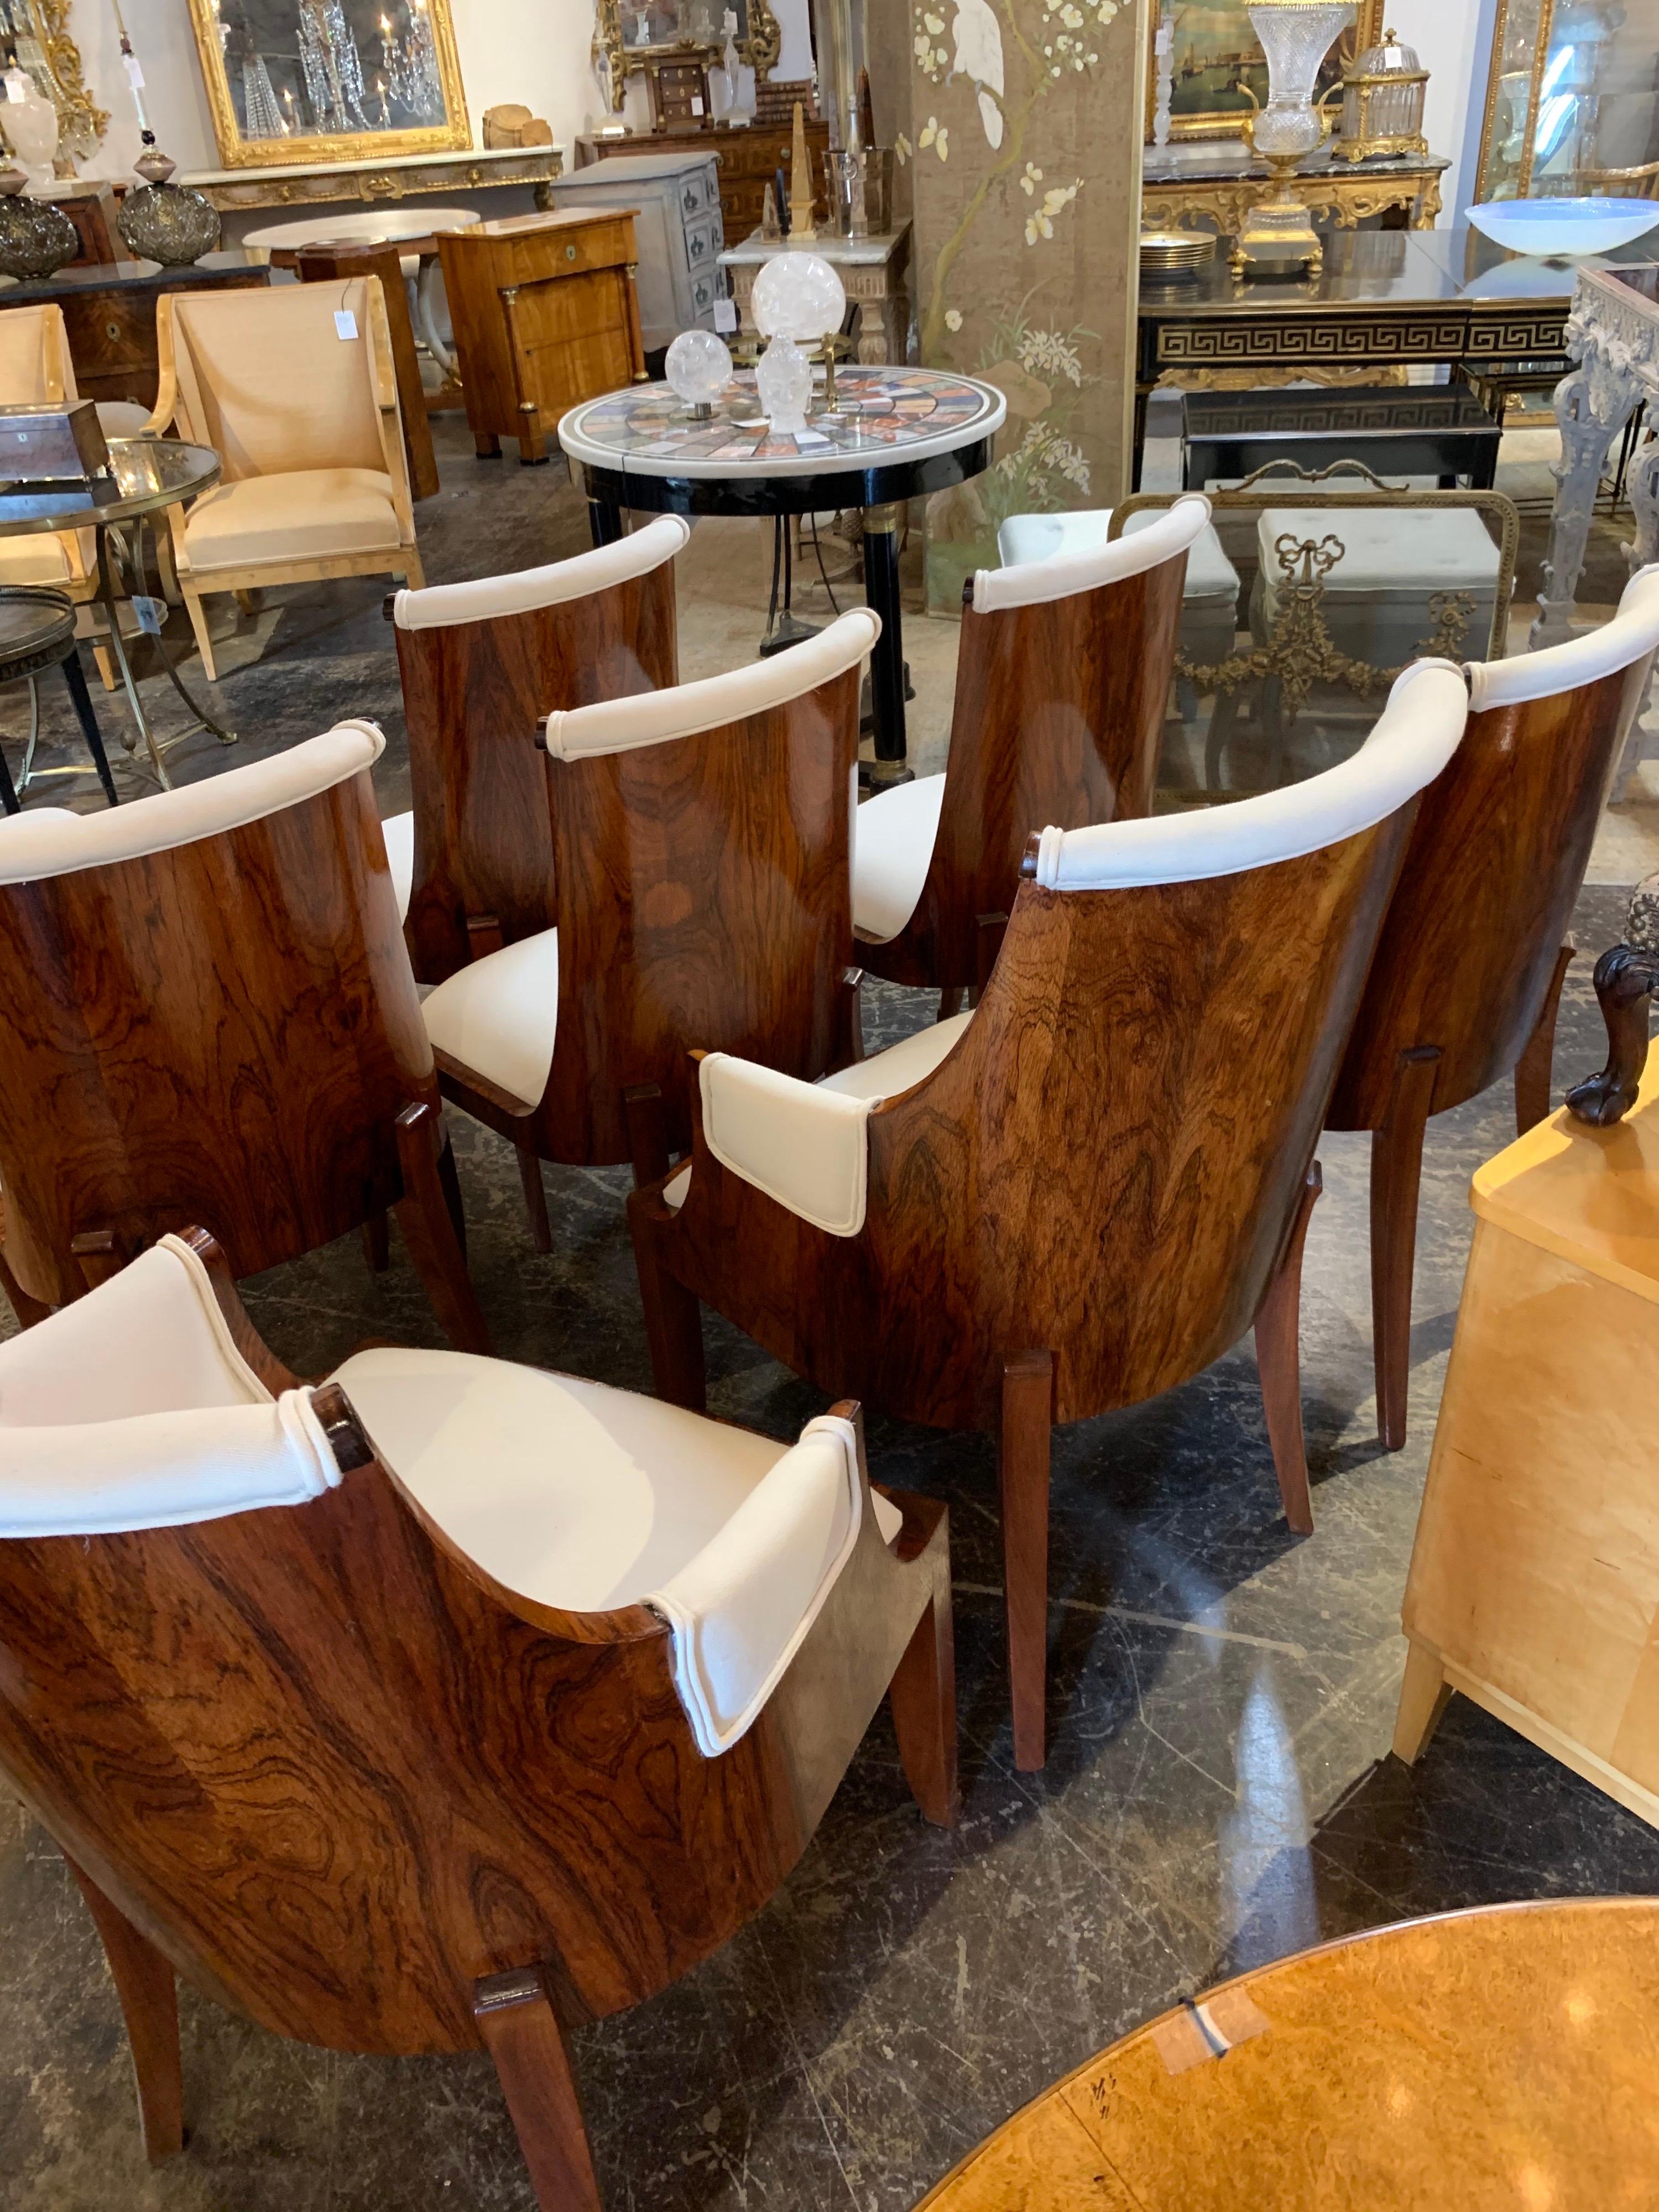 Exquisite set of French Art Deco rosewood dining chairs. Very fine finish on these and upholstered in a crème colored fabric. The set includes 2 armchairs and 6 side chairs. Exceptional quality and truly elegant!